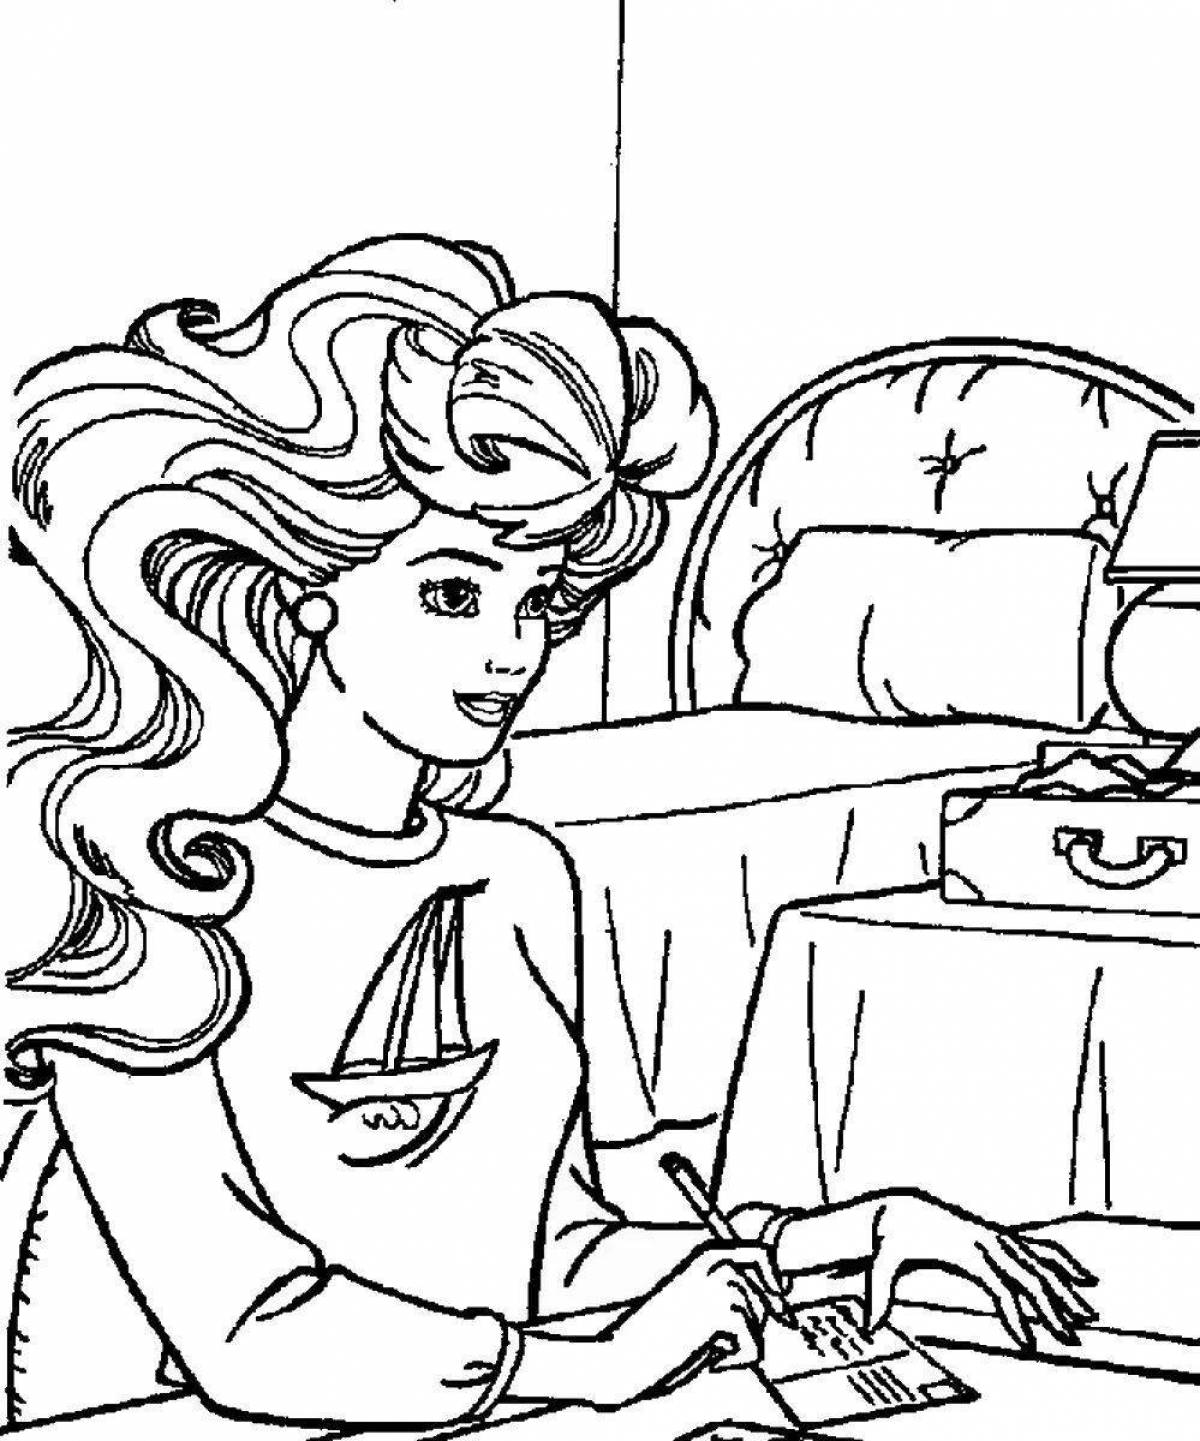 Charming barbie 90s coloring book